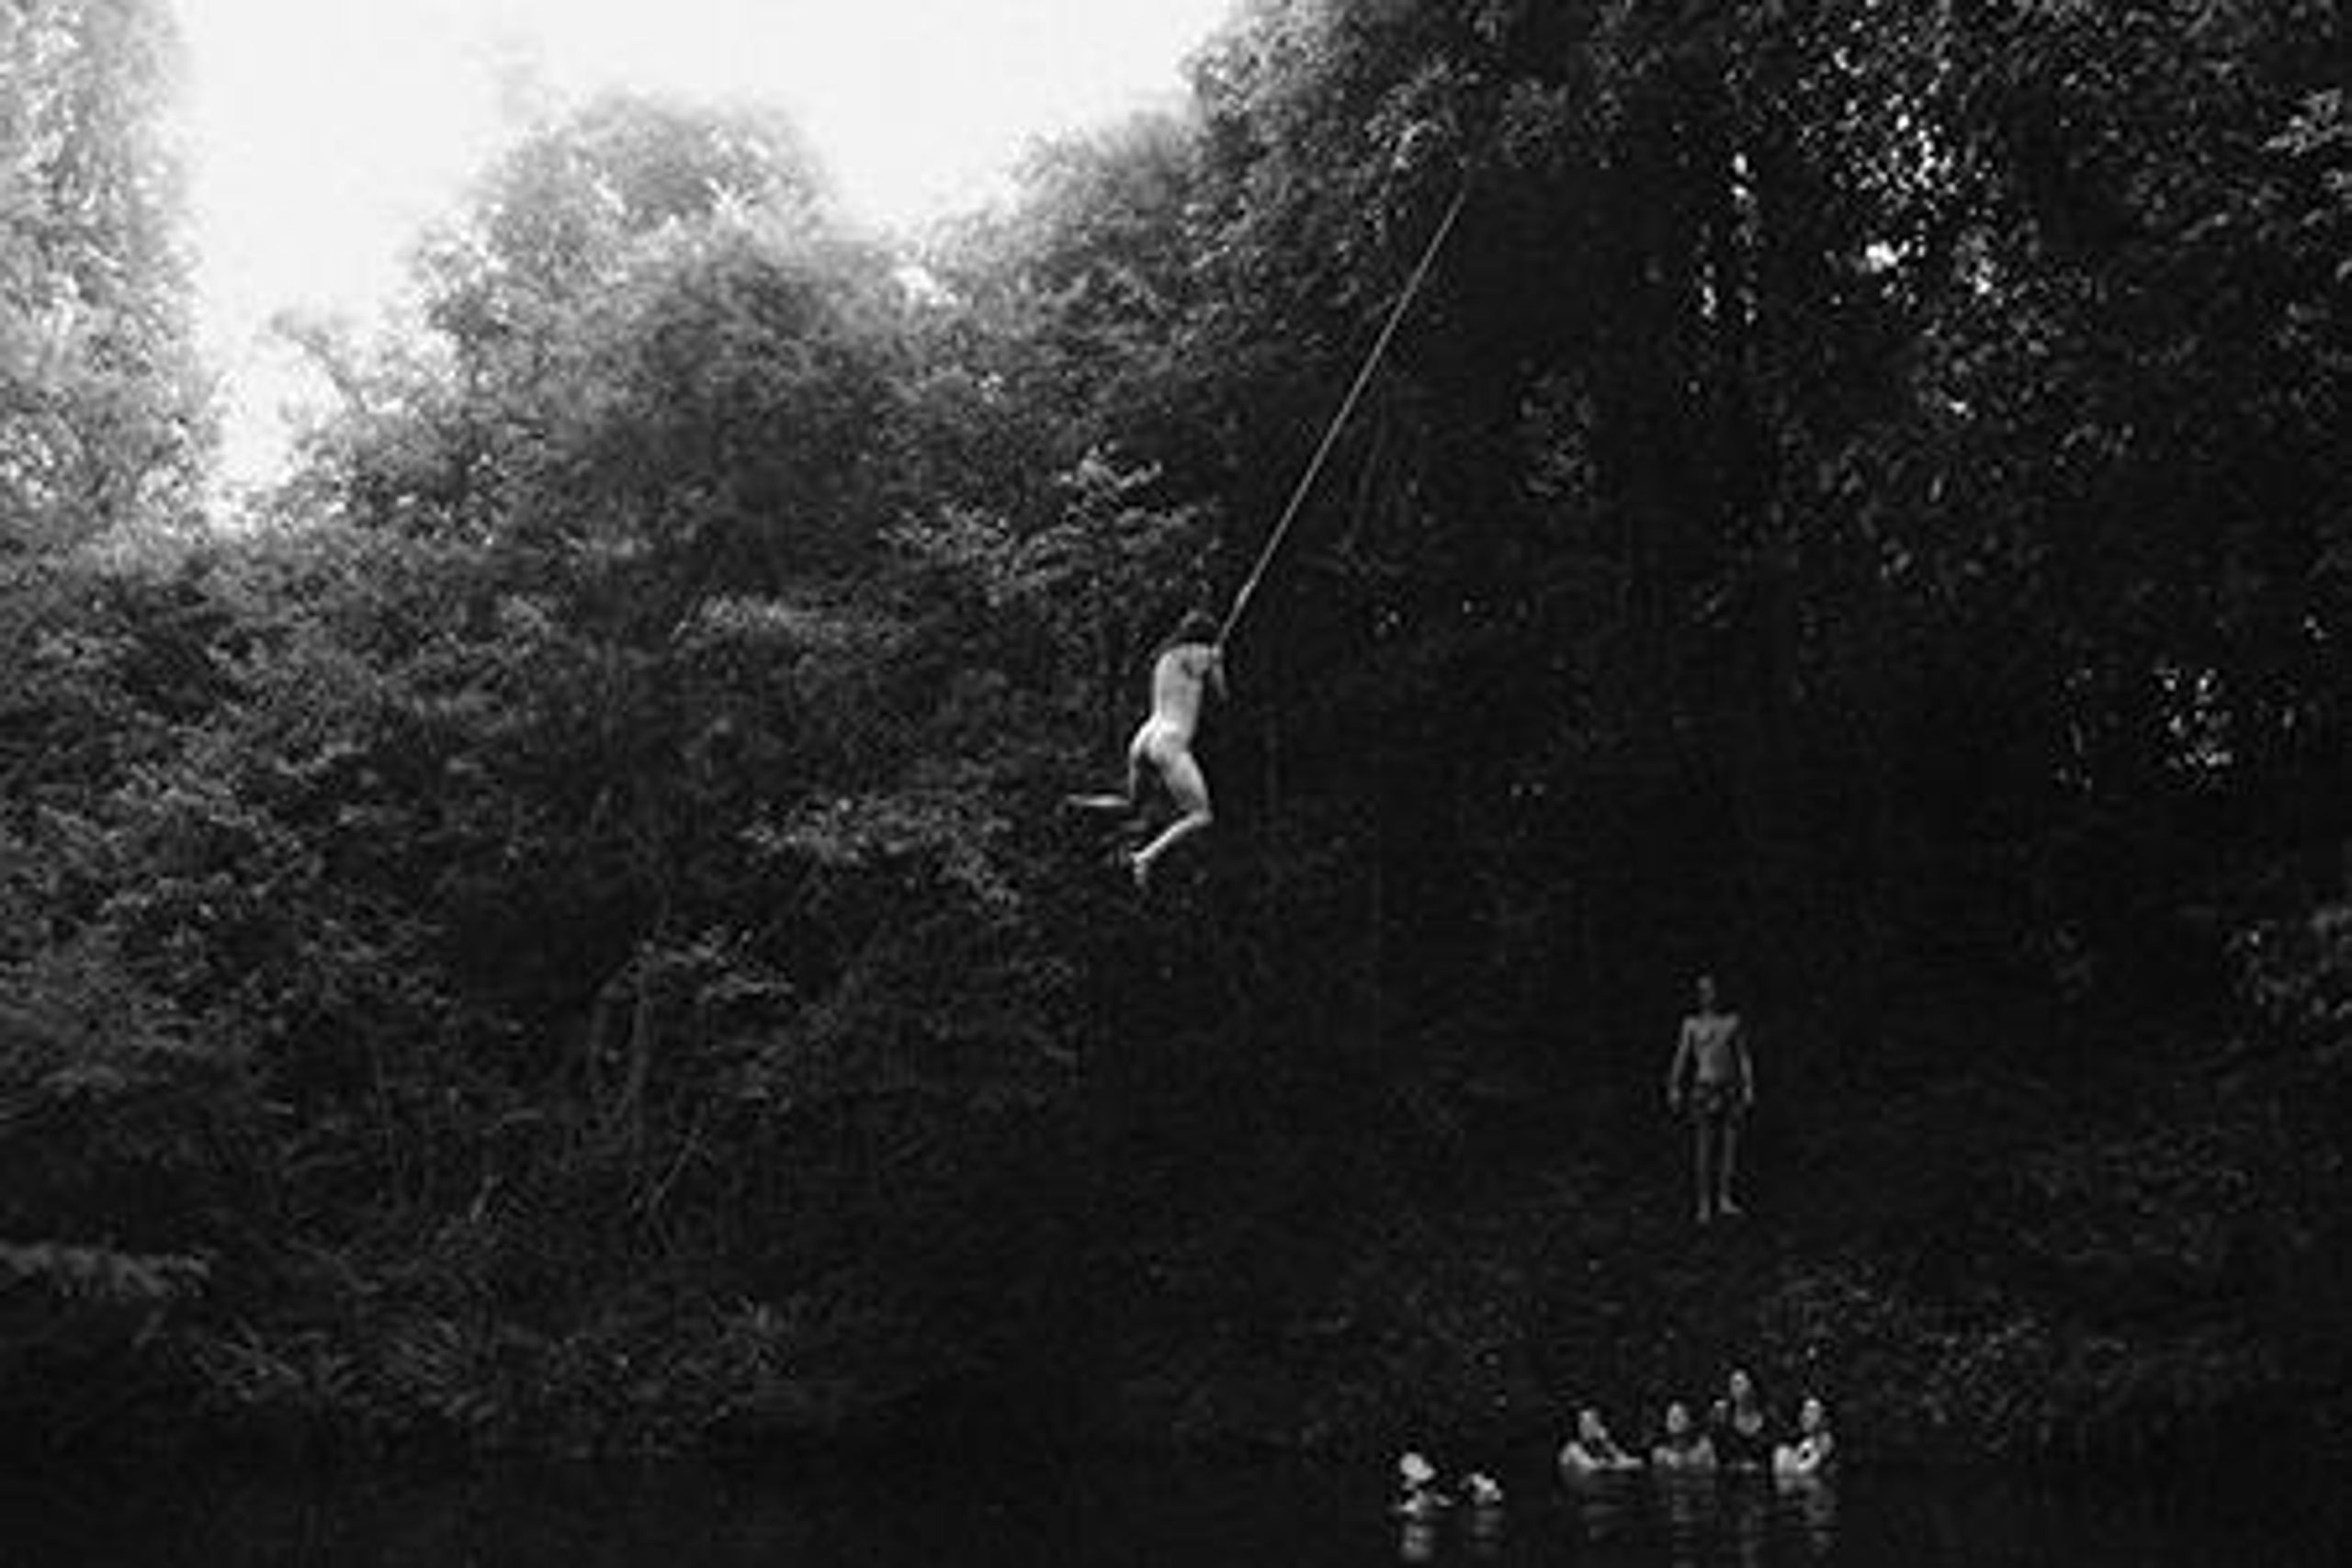 A nude person swinging off a tree by a rope, ready to let go and fall into the water below.